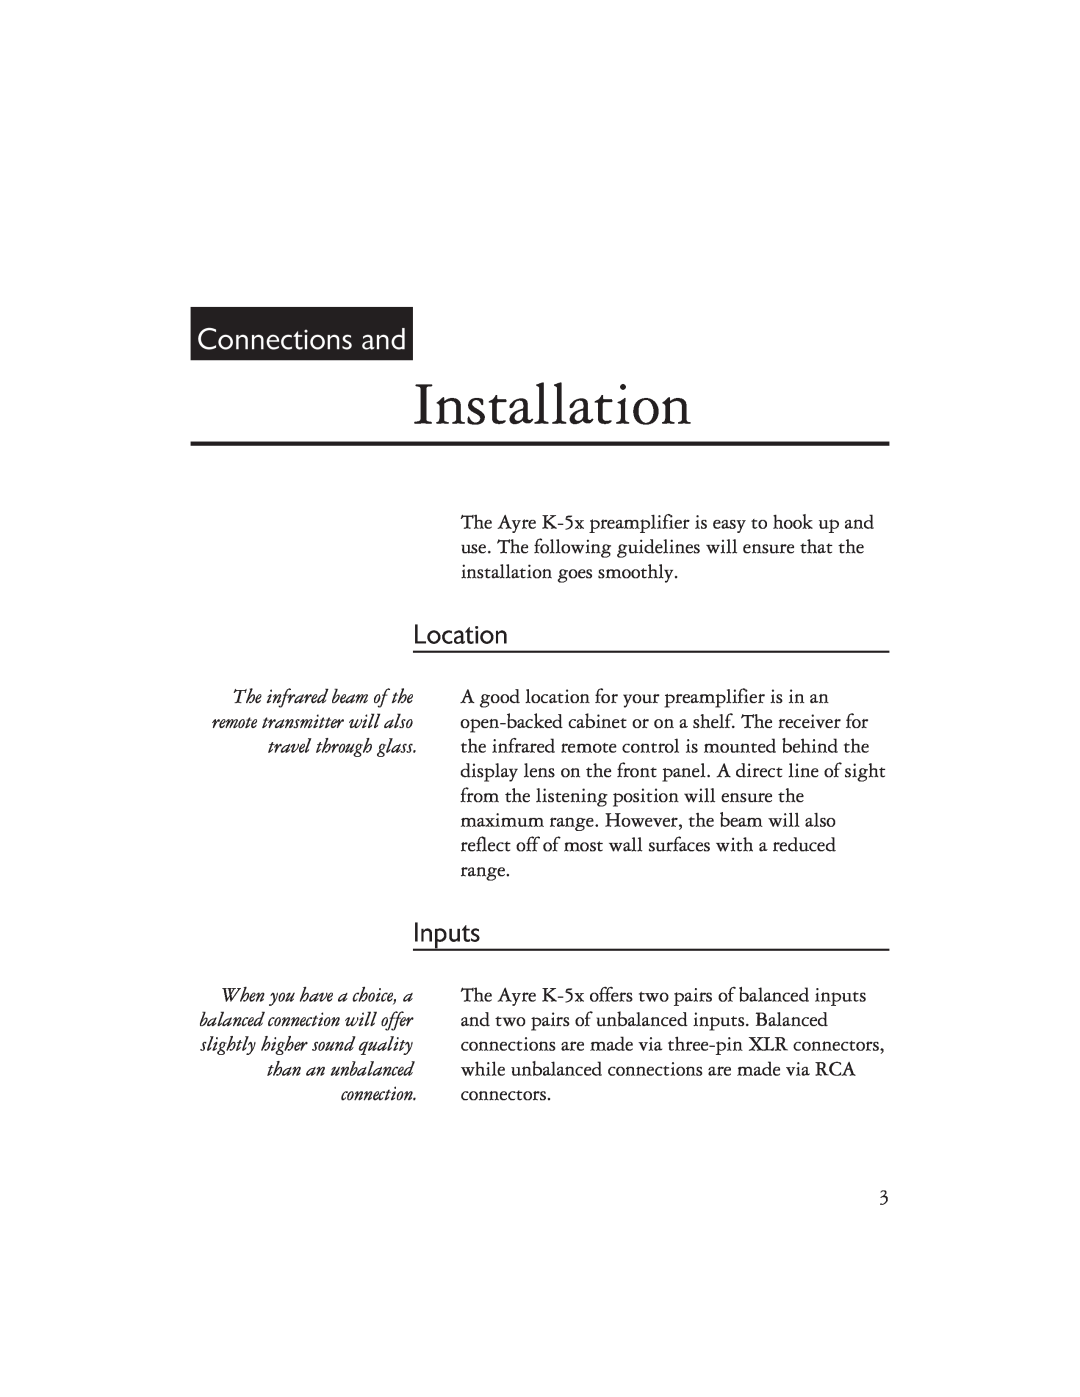 Ayre Acoustics K-5x owner manual Installation, Connections and, Location, Inputs, connection. connectors 